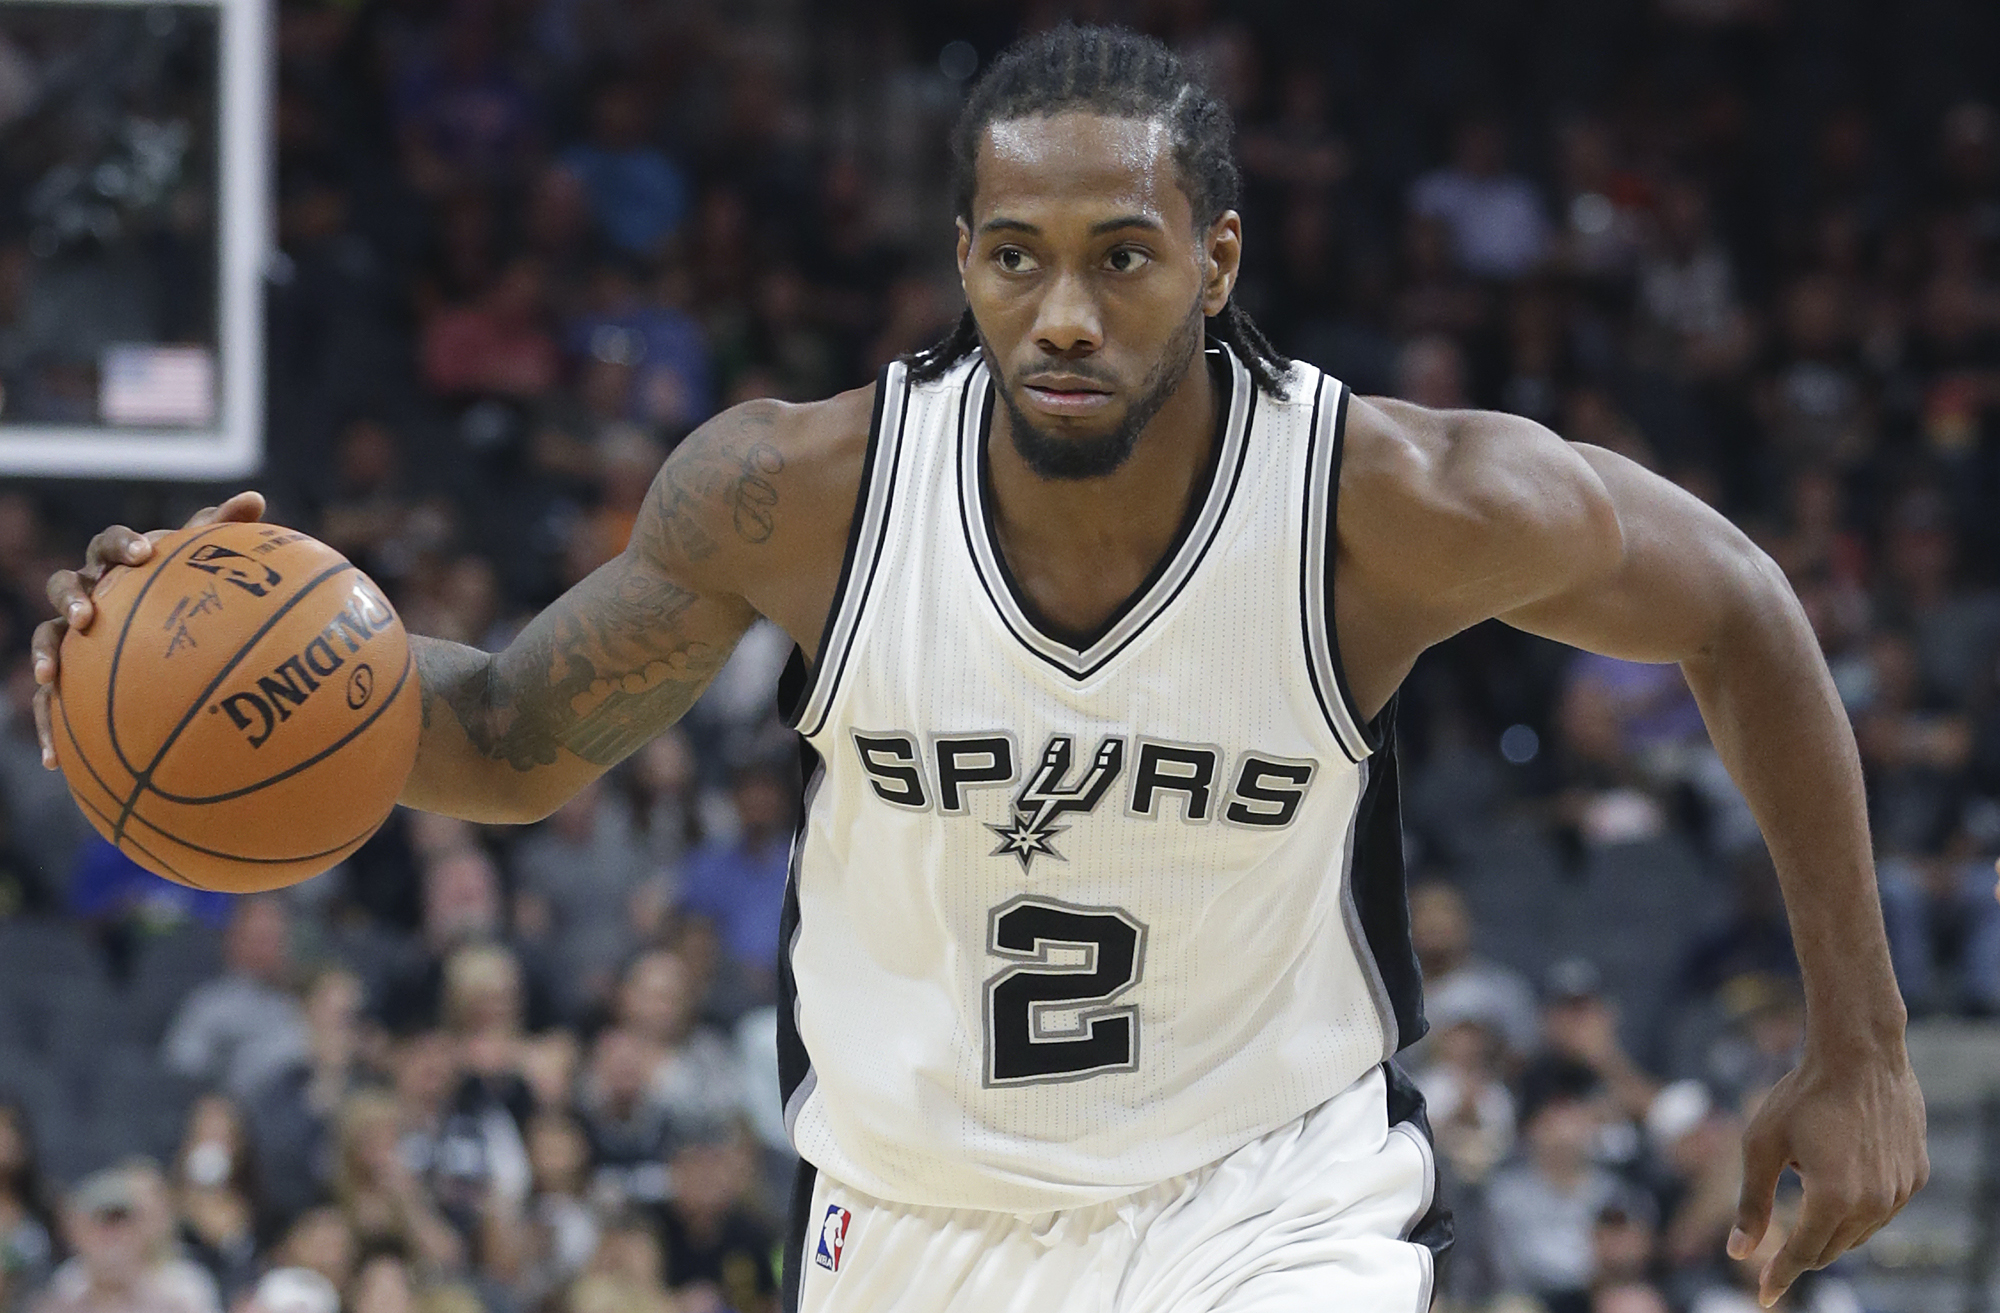 Given circumstances, Spurs did well in trading Kawhi Leonard to